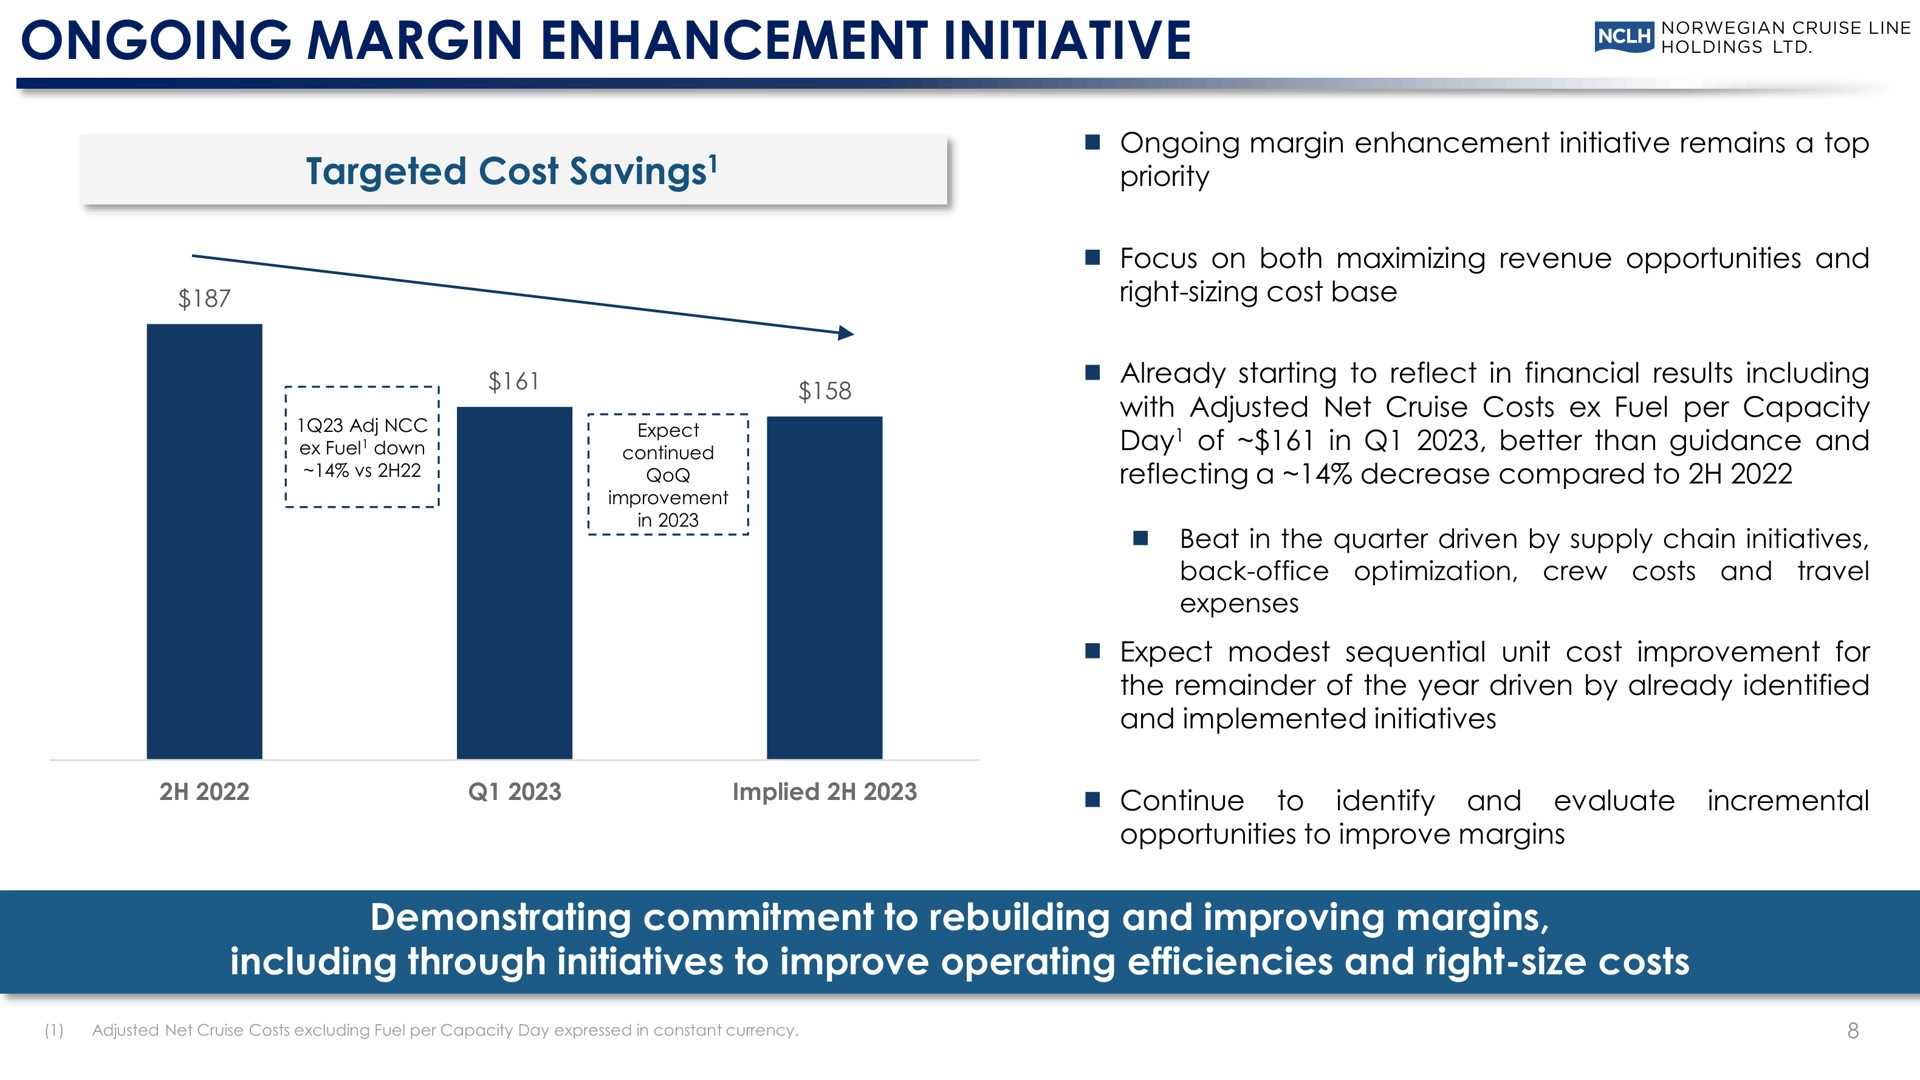 ongoing margin enhancement initiative targeted cost savings demonstrating commitment to rebuilding and improving margins including through initiatives to improve operating efficiencies and right size costs tad | Norwegian Cruise Line